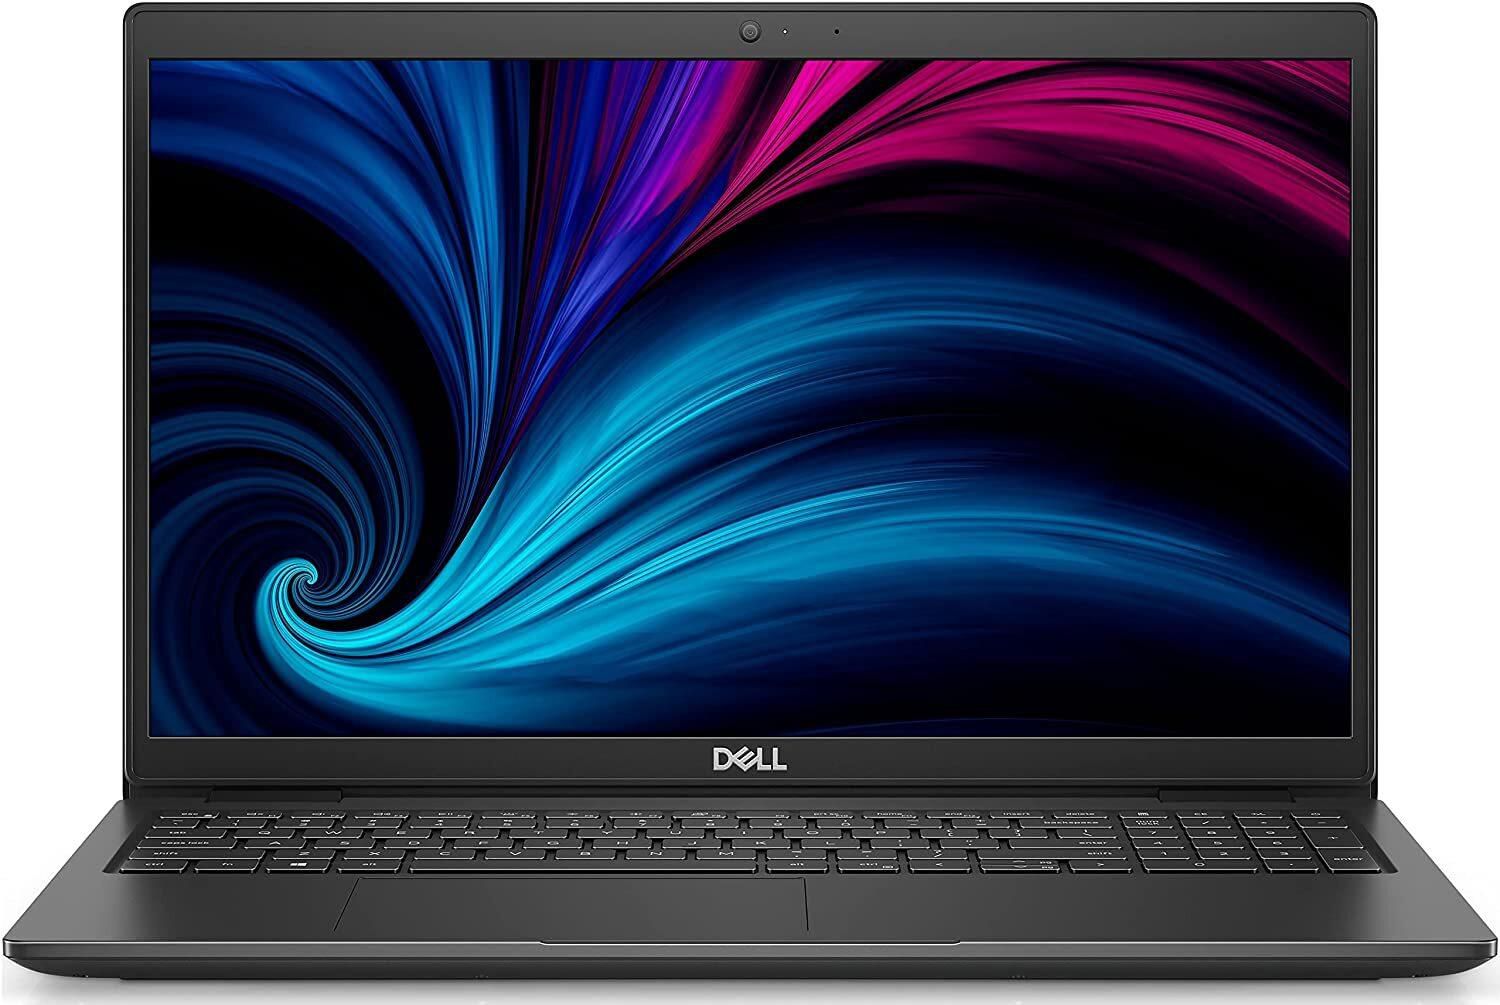 Dell Latitude 3520 Business Laptop, 15.6&quot; FHD, 11th Gen Intel Quad-Core i7-1165G7 Up To 4.7GHz, 32GB DDR4 RAM, 1TB PCIe SSD, Wi-Fi 6, Bluetooth 5.1, Type-C, HDMI, Windows 10 Pro, 2021 Newest